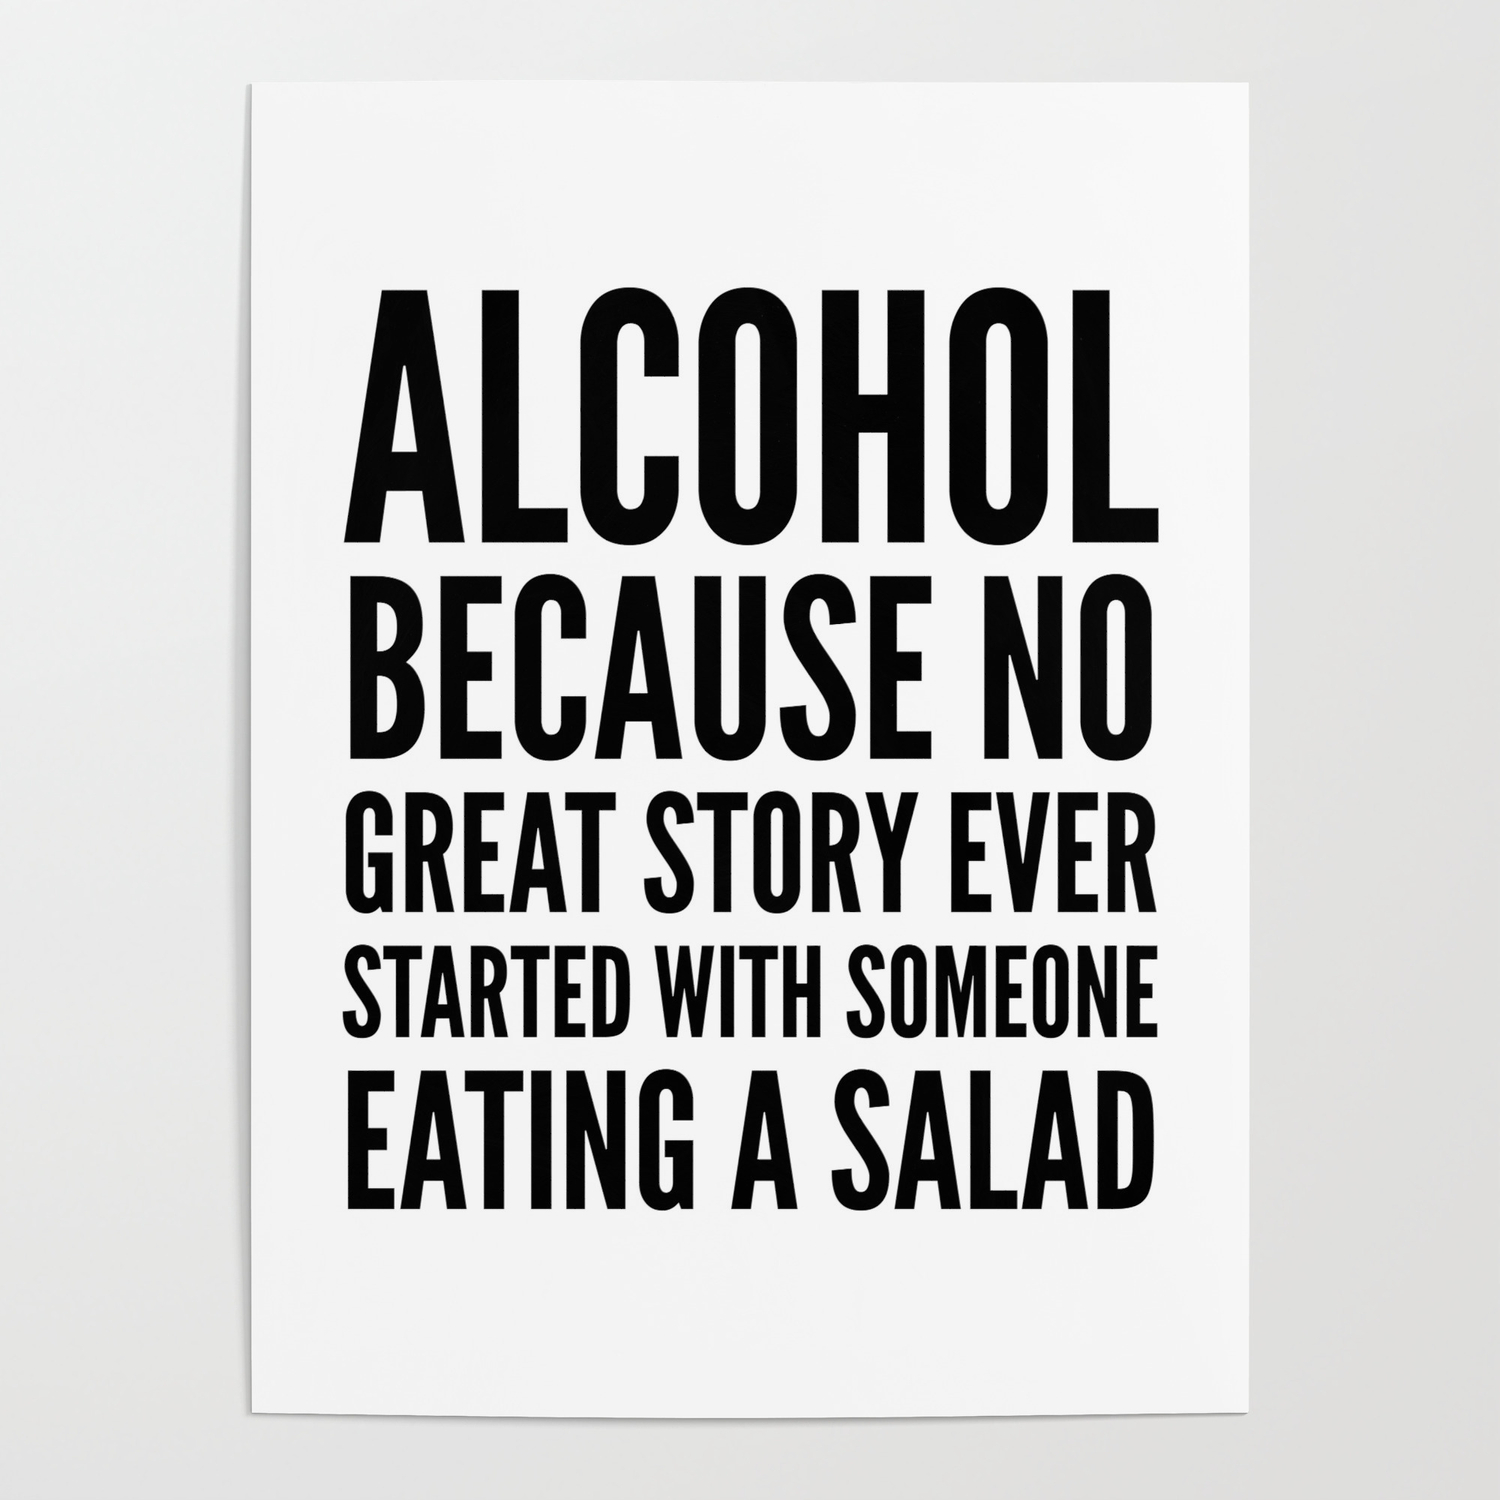 Alcohol Because No Great Story Ever Started With Someone Eating A Salad Tin Sign 